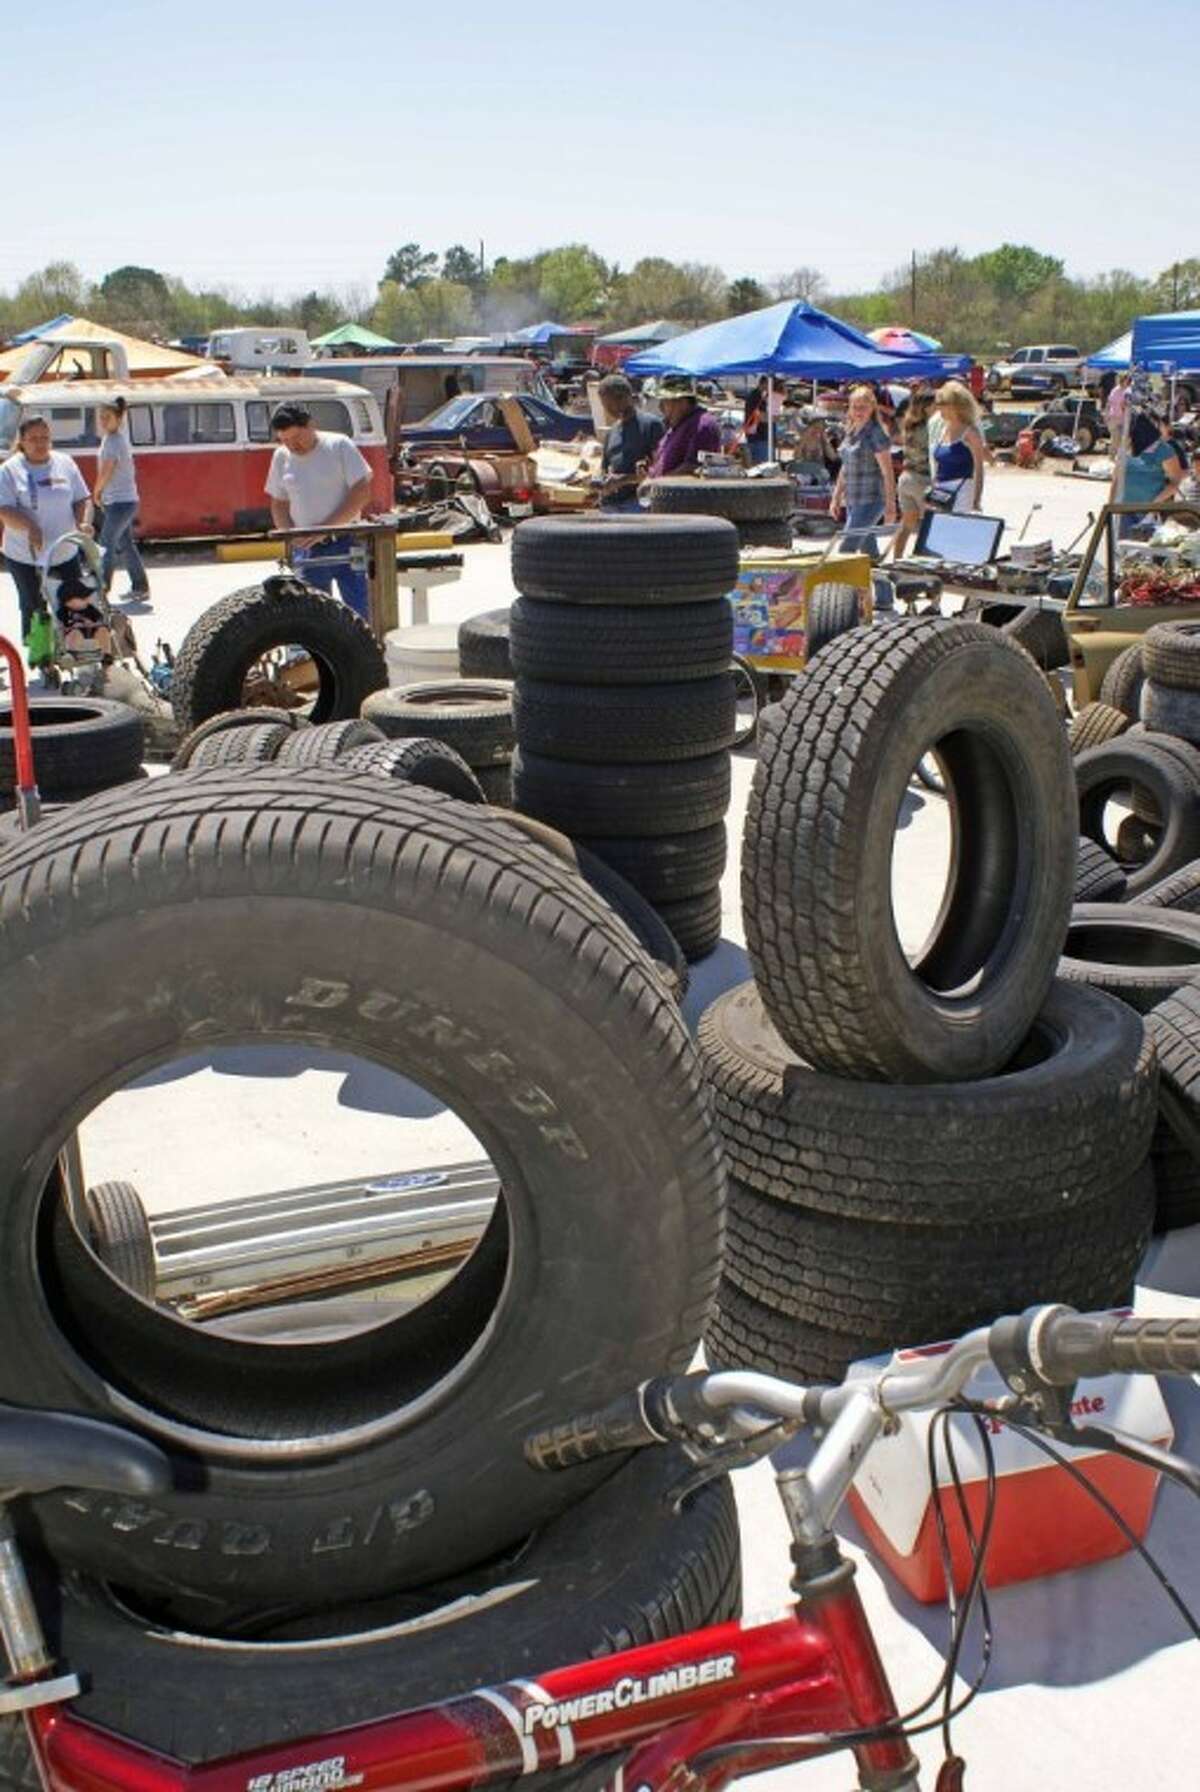 Cruise into annual auto swap meet, March 1718